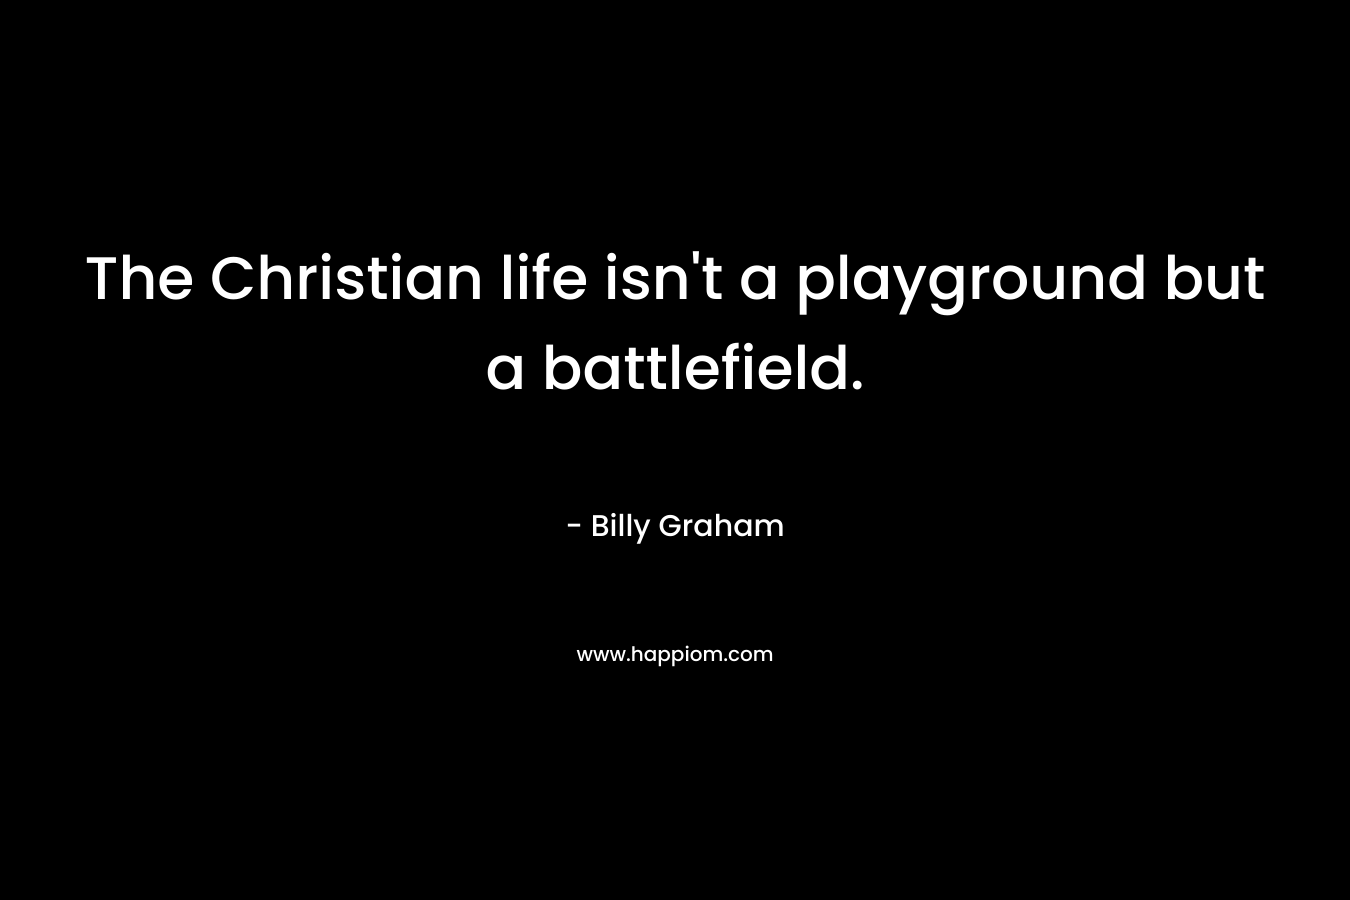 The Christian life isn’t a playground but a battlefield. – Billy Graham